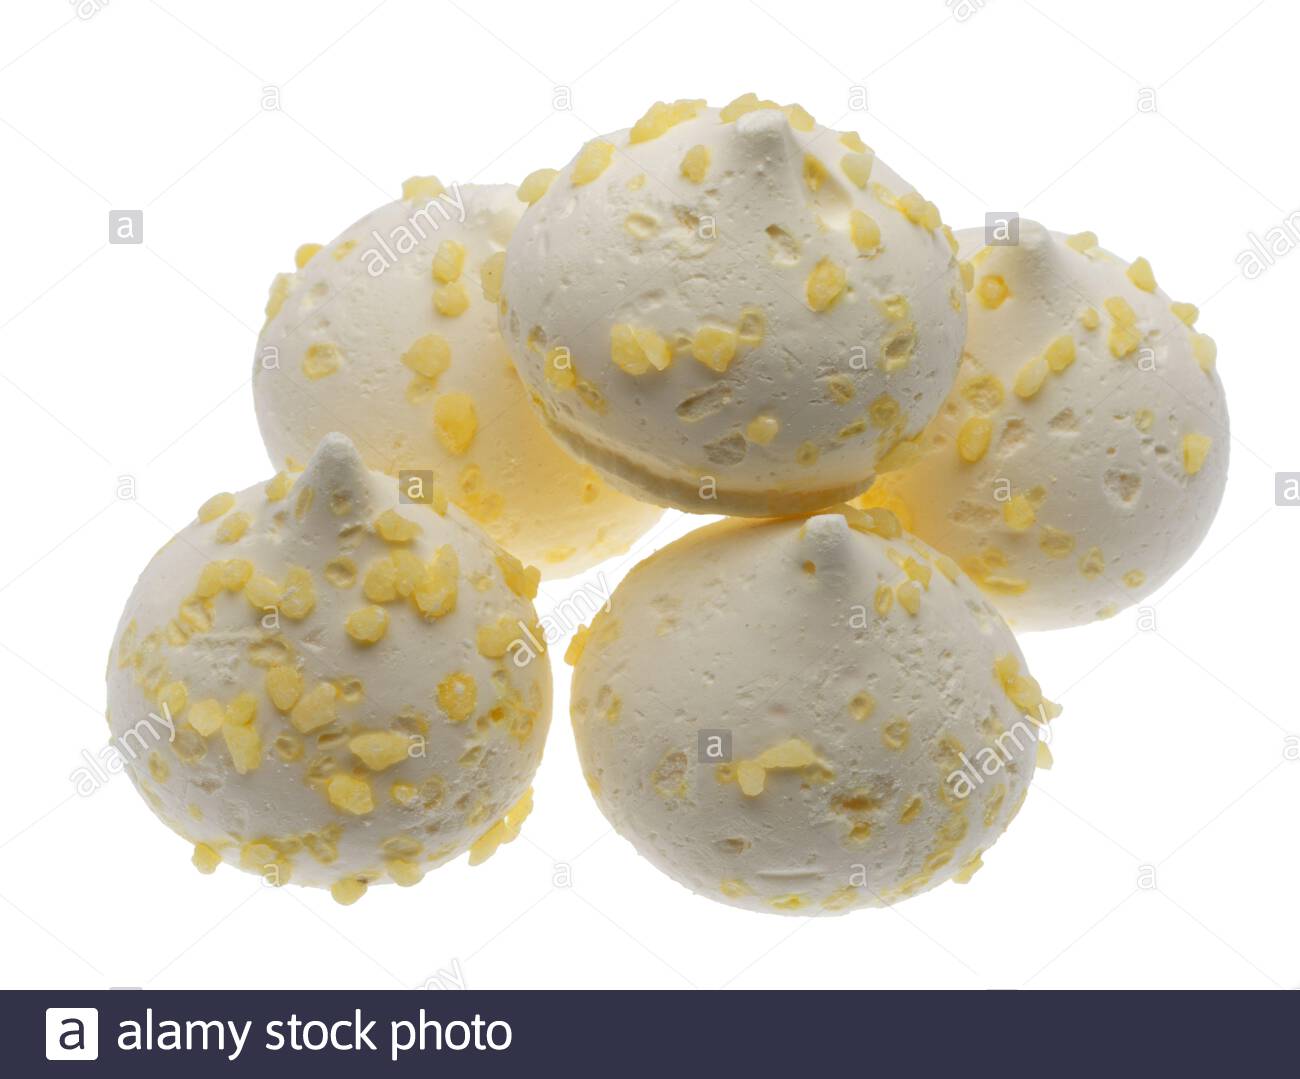 a-group-of-five-mini-meringues-against-a-white-background-2AK948T.jpg